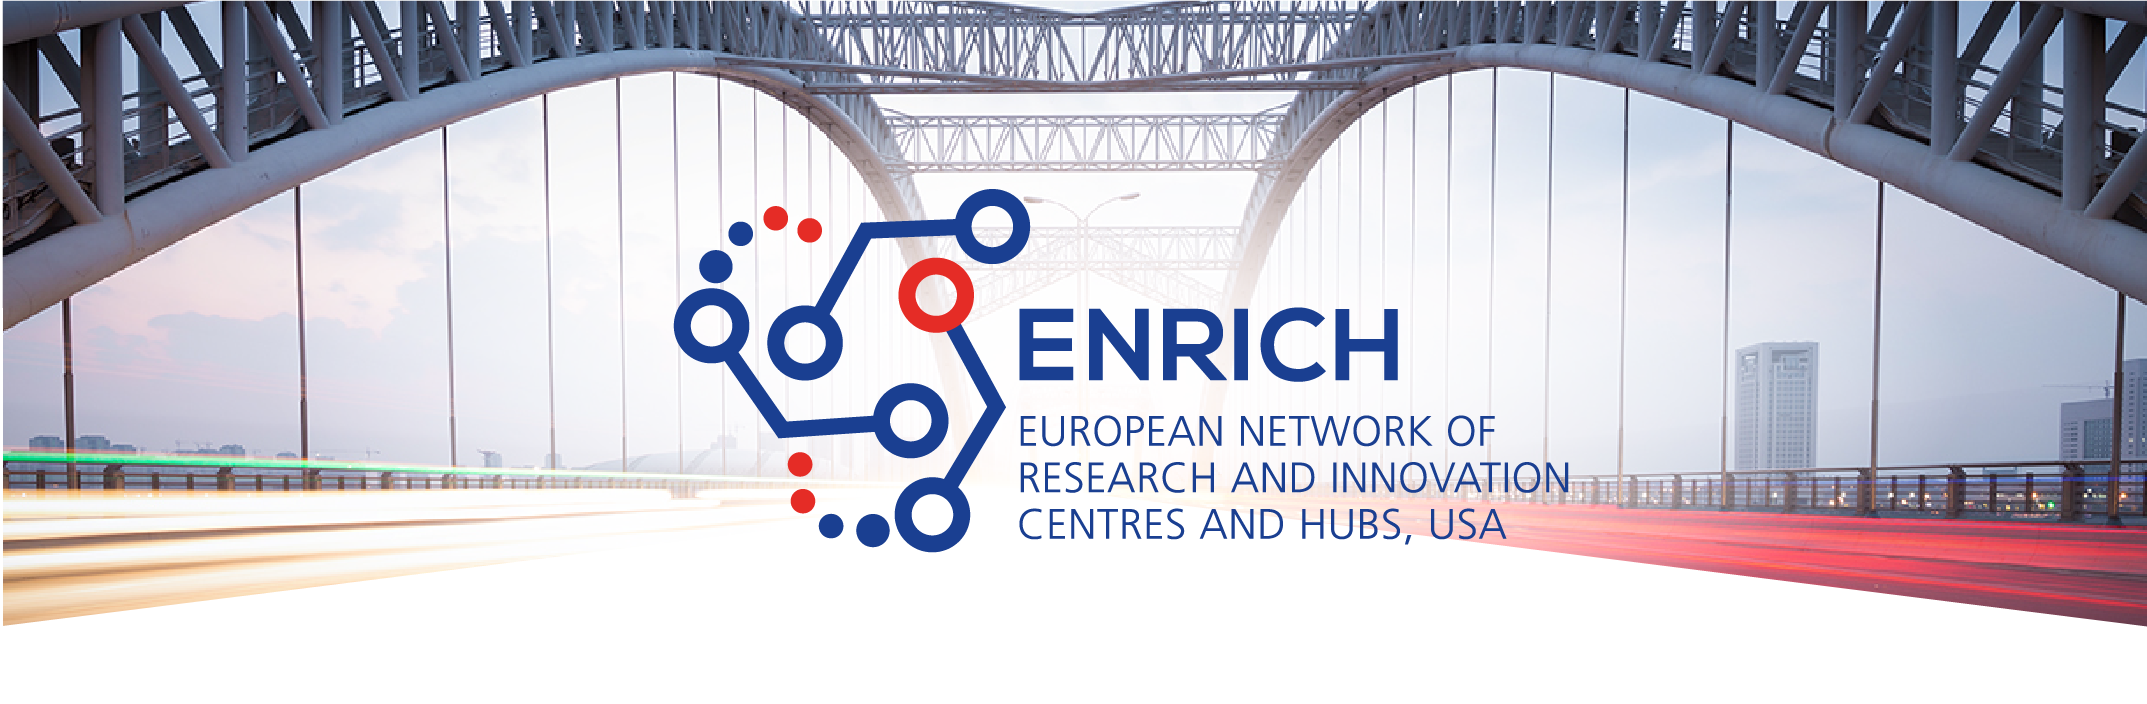 Call for Applications: ENRICH In the USA Advanced Manufacturing-focused Tour